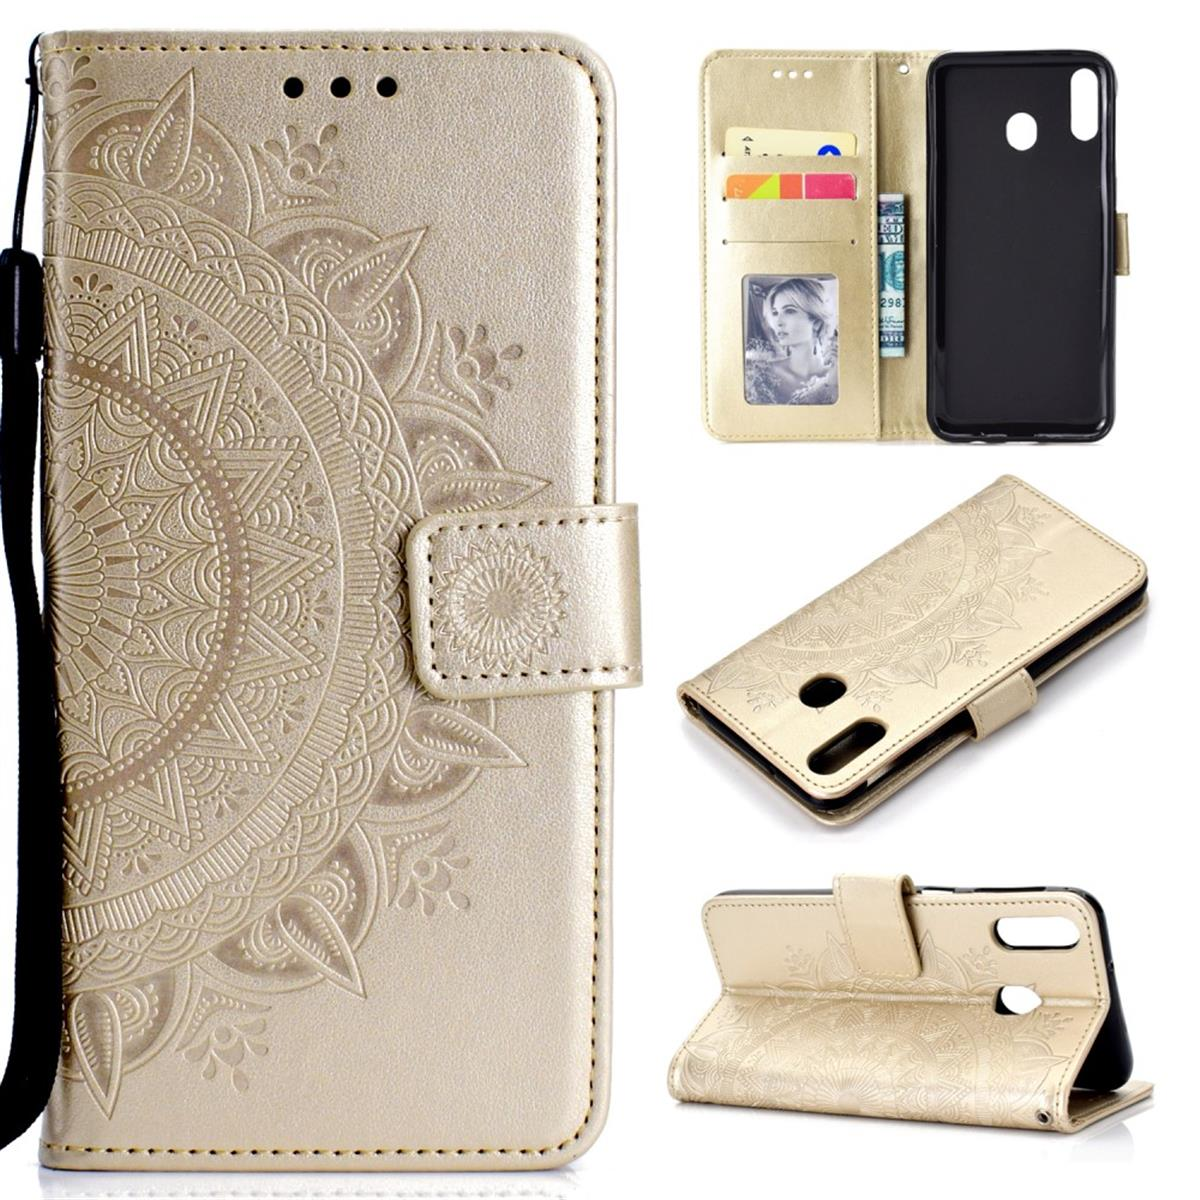 COVERKINGZ Klapphülle Huawei, Muster, Bookcover, Mandala mit Gold Y6p